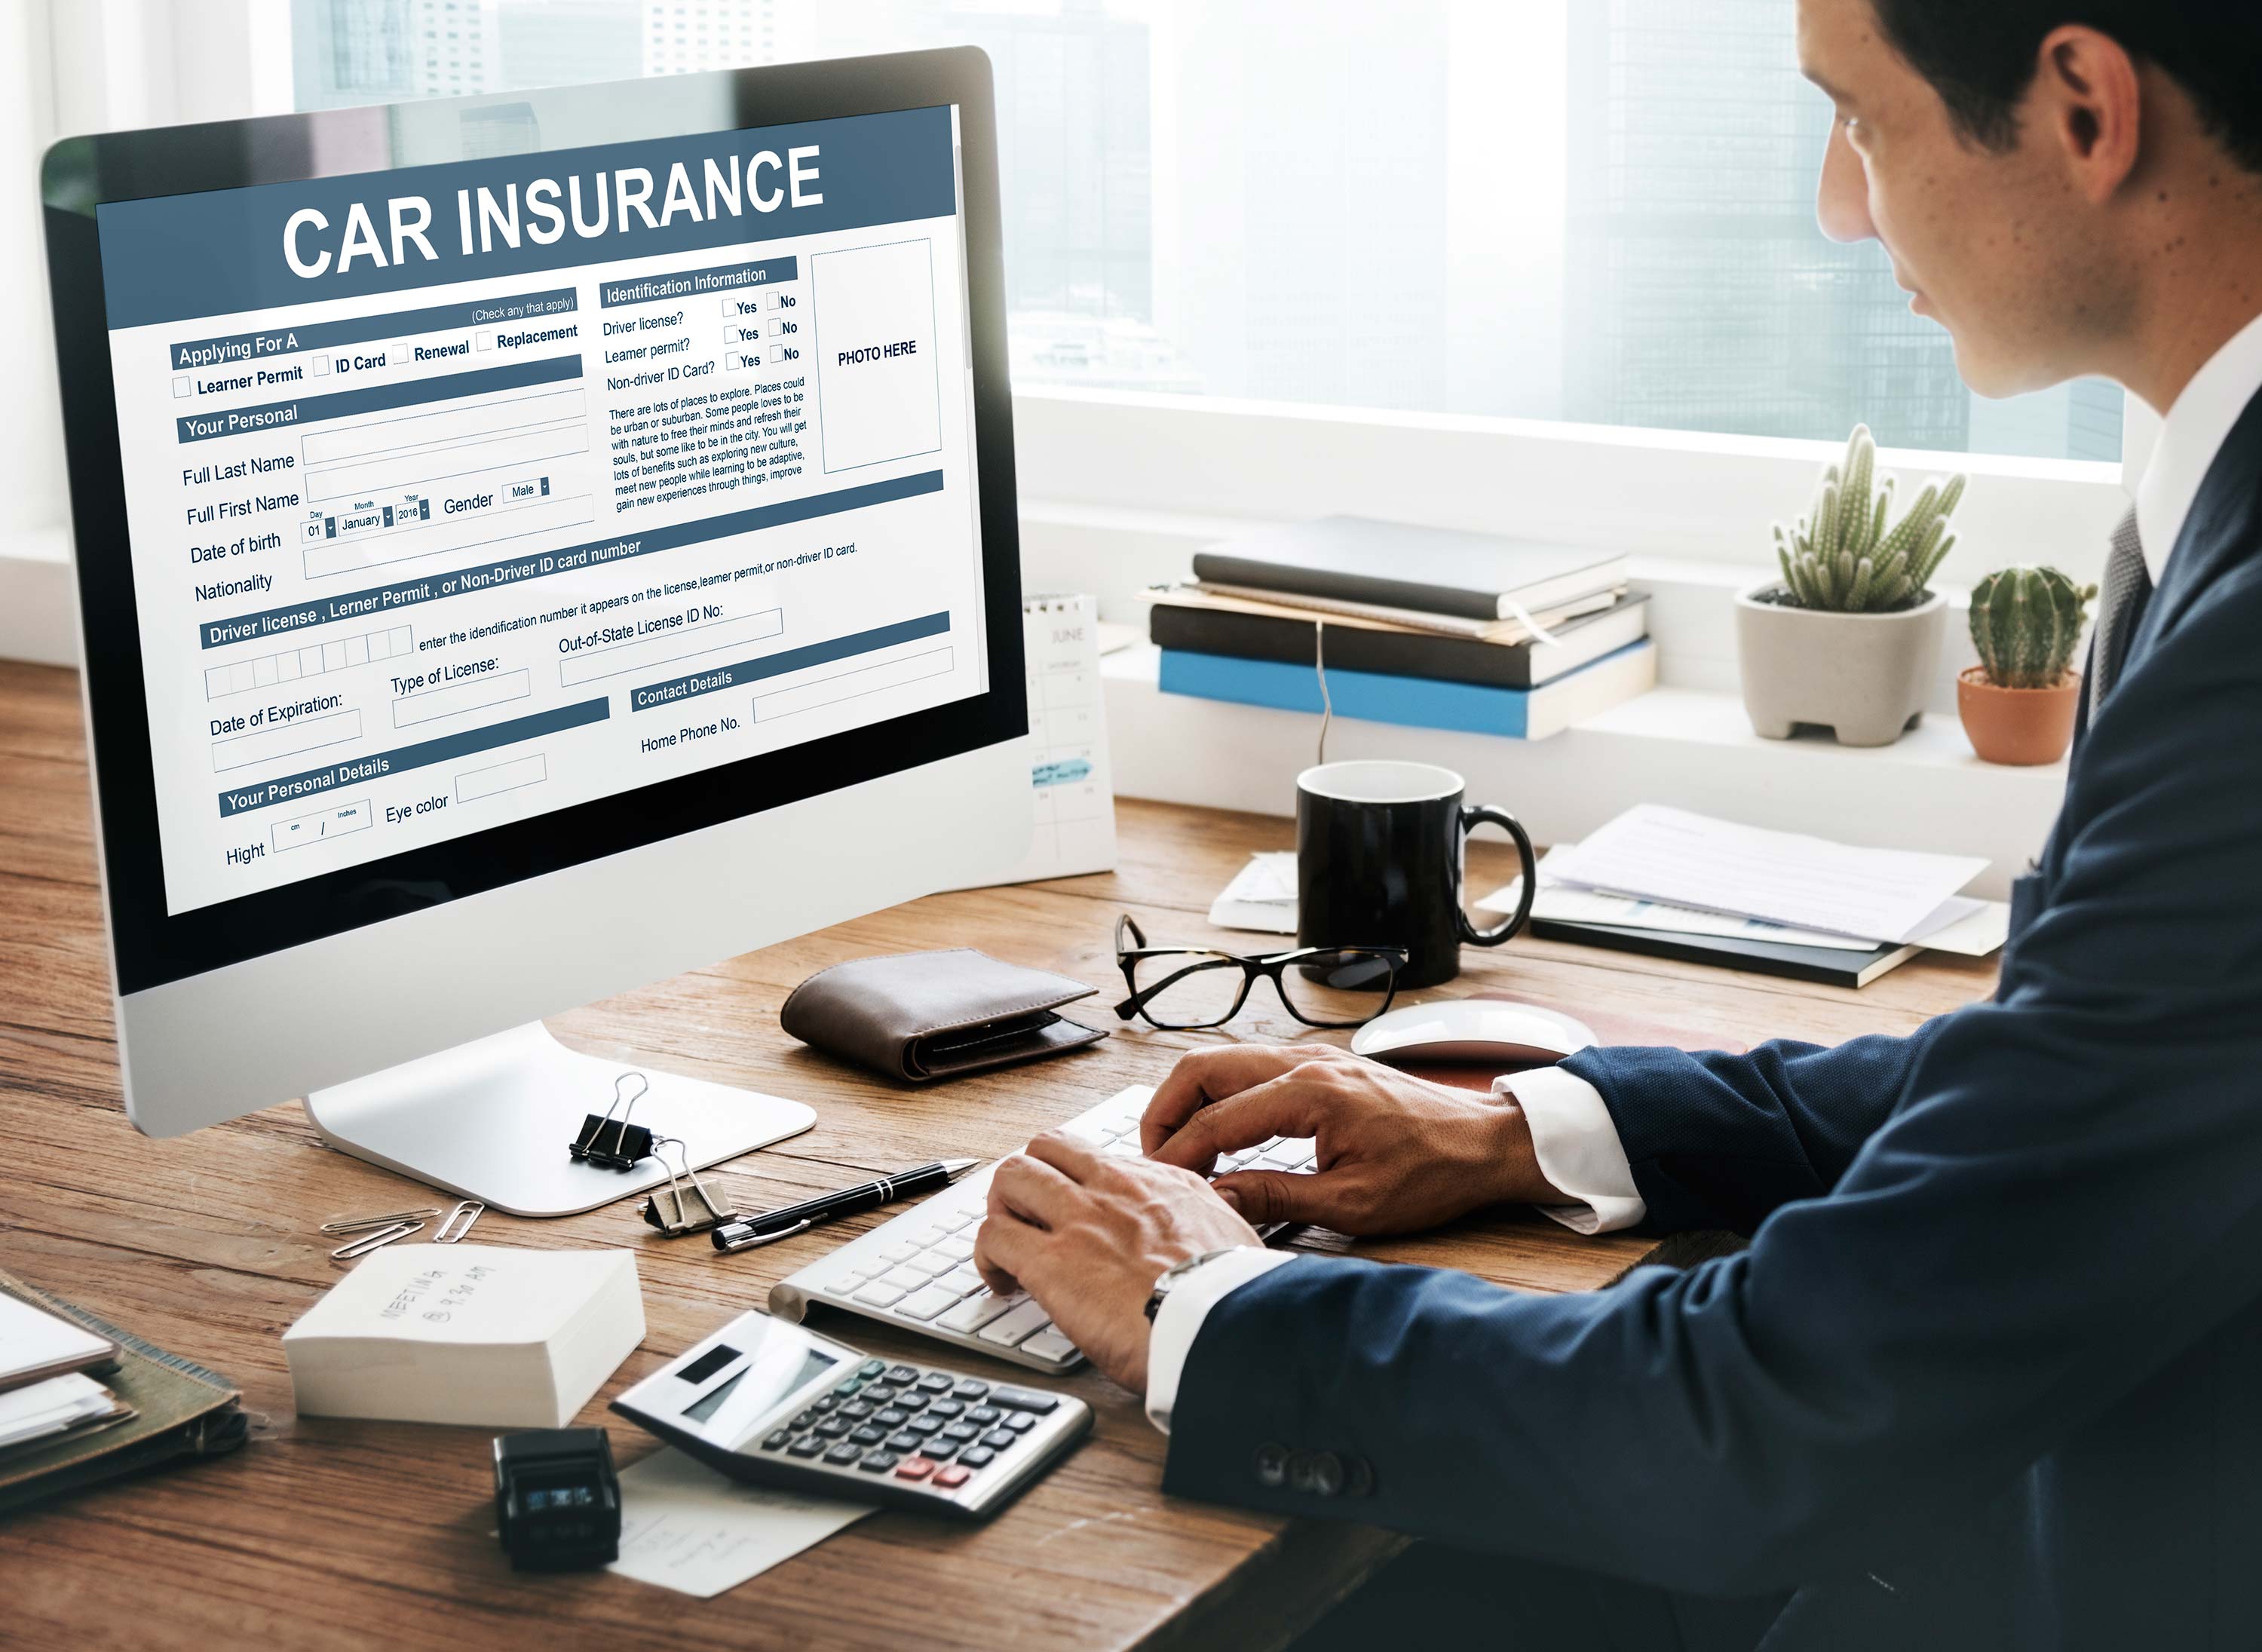 How to Check Car Insurance Policy Status Online